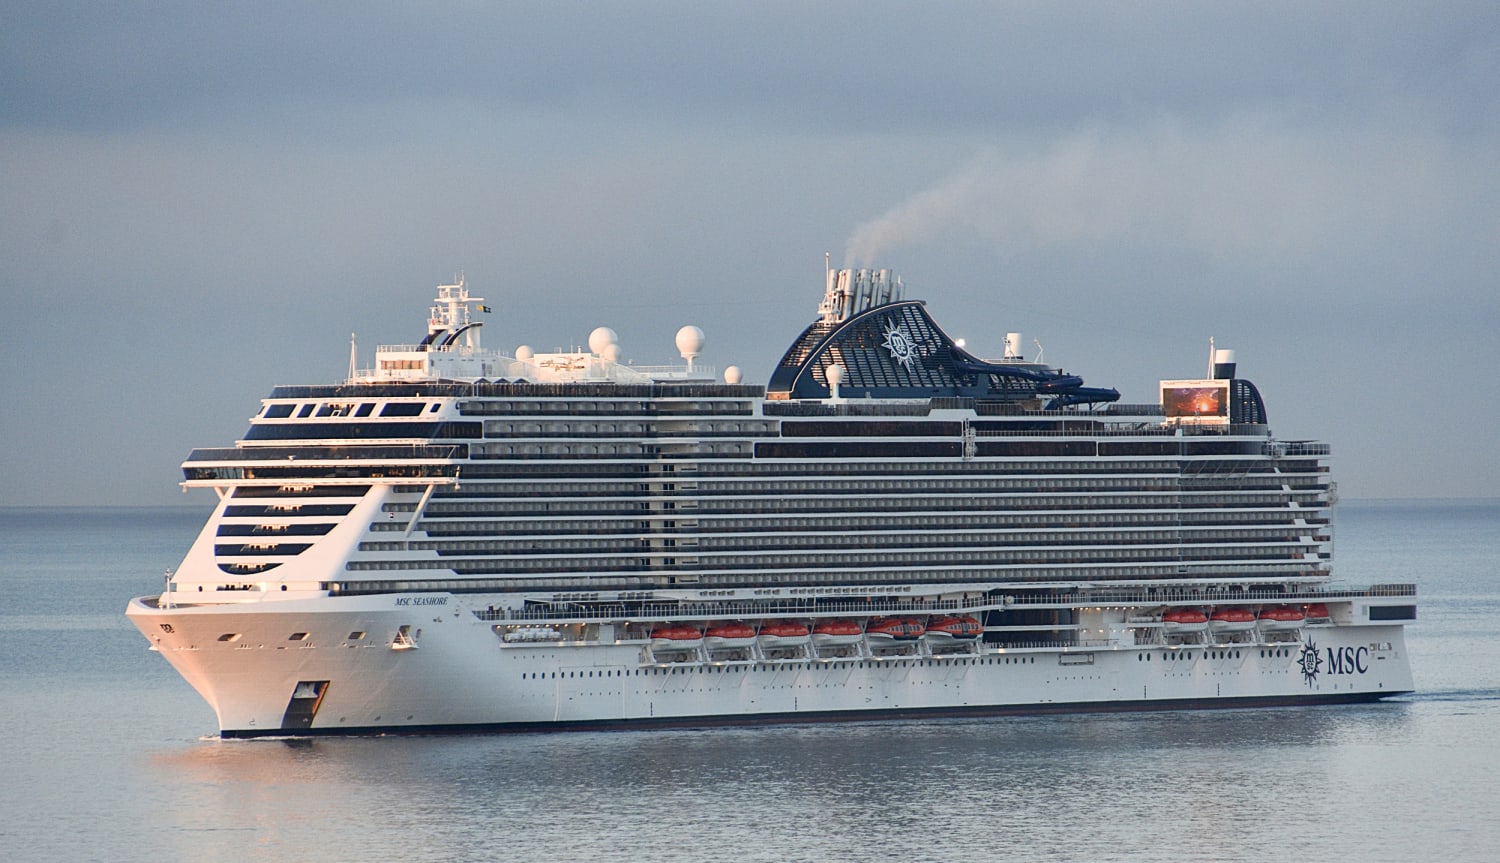 Teen plunges to death from cruise ship that was returning to Miami